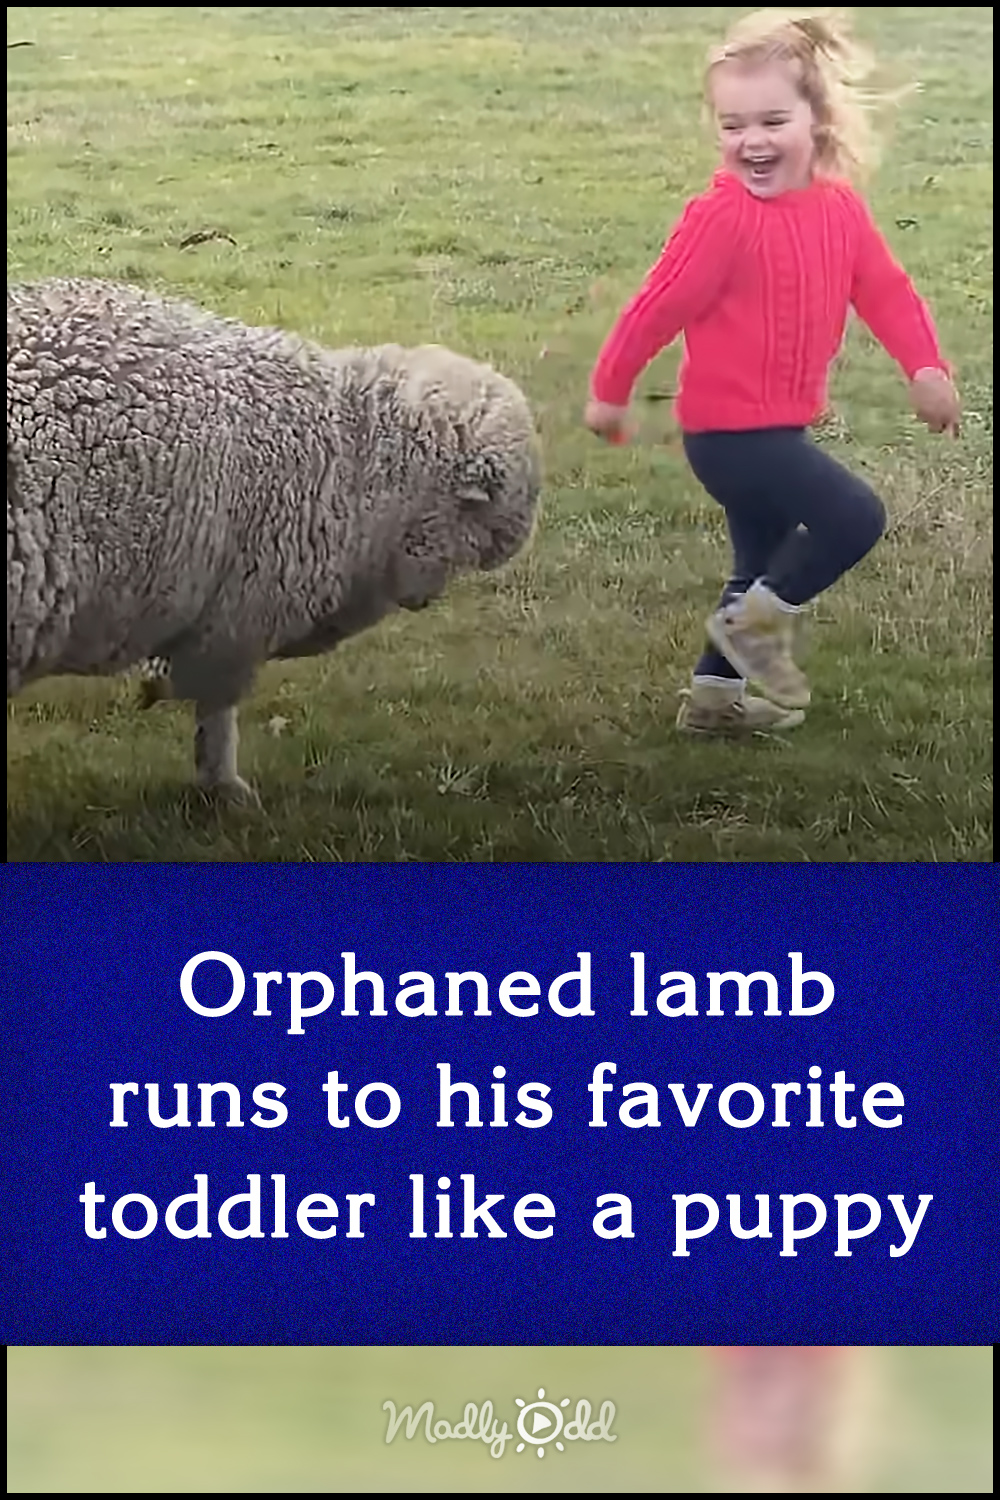 Orphaned lamb runs to his favorite toddler like a puppy